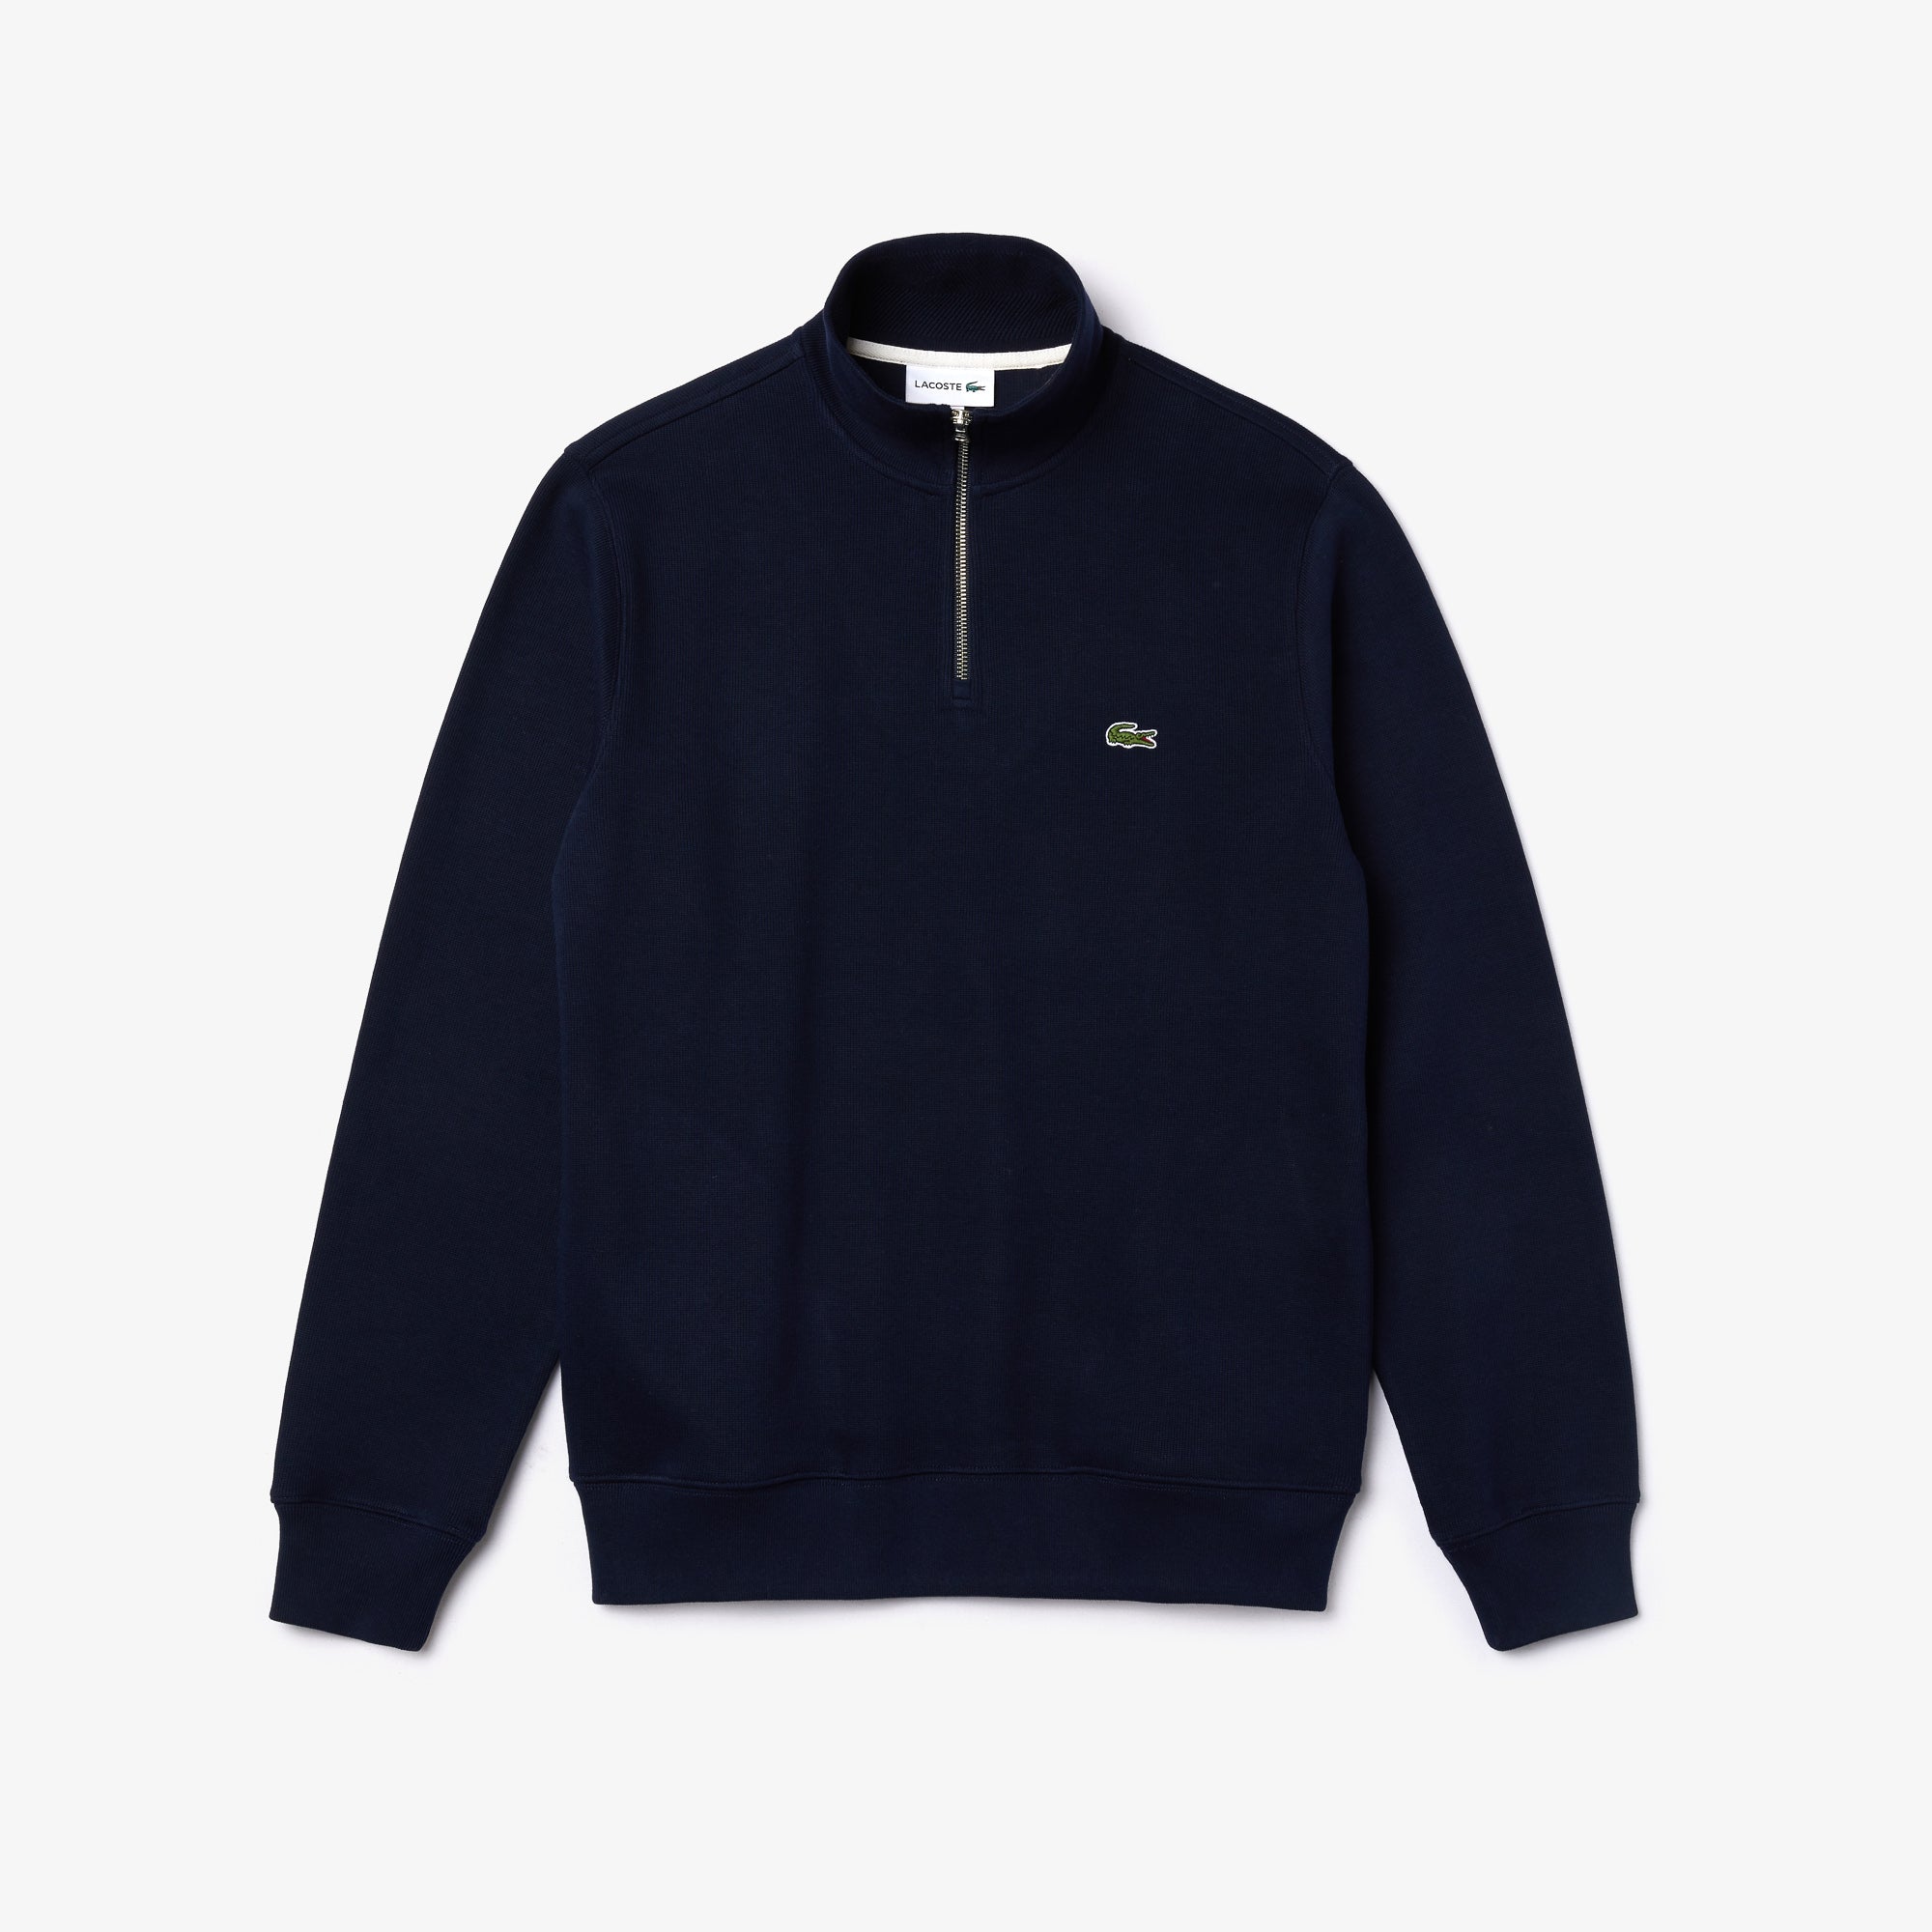 Sweatshirt men's cotton with stand-up collar and zipper - 166 NAVY BLUE